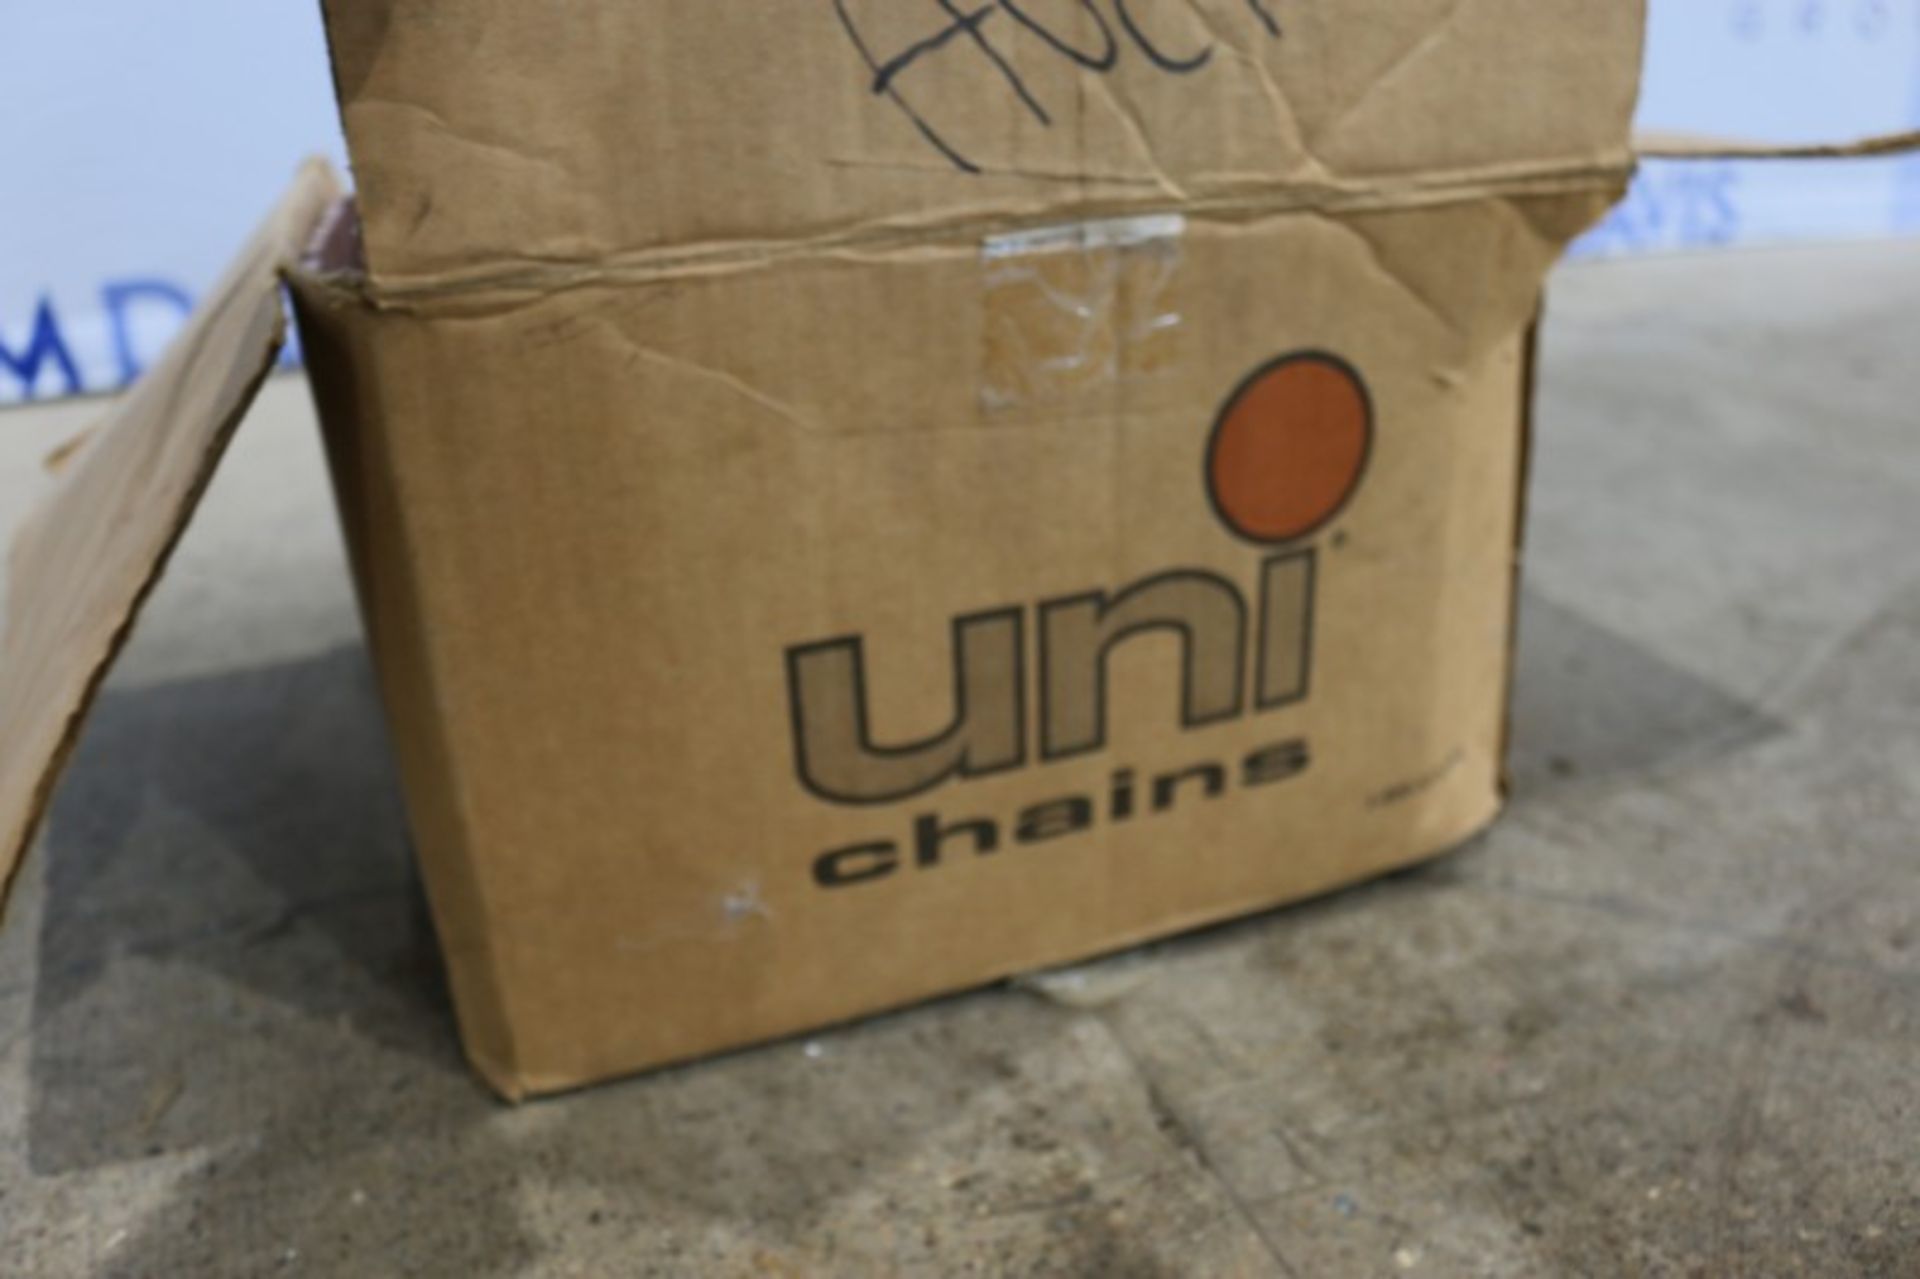 NEW Uni Chain Plastic Product Chain,with Aprox. 8" W Chain (INV#69370)(Located at the MDG Auction - Image 3 of 3